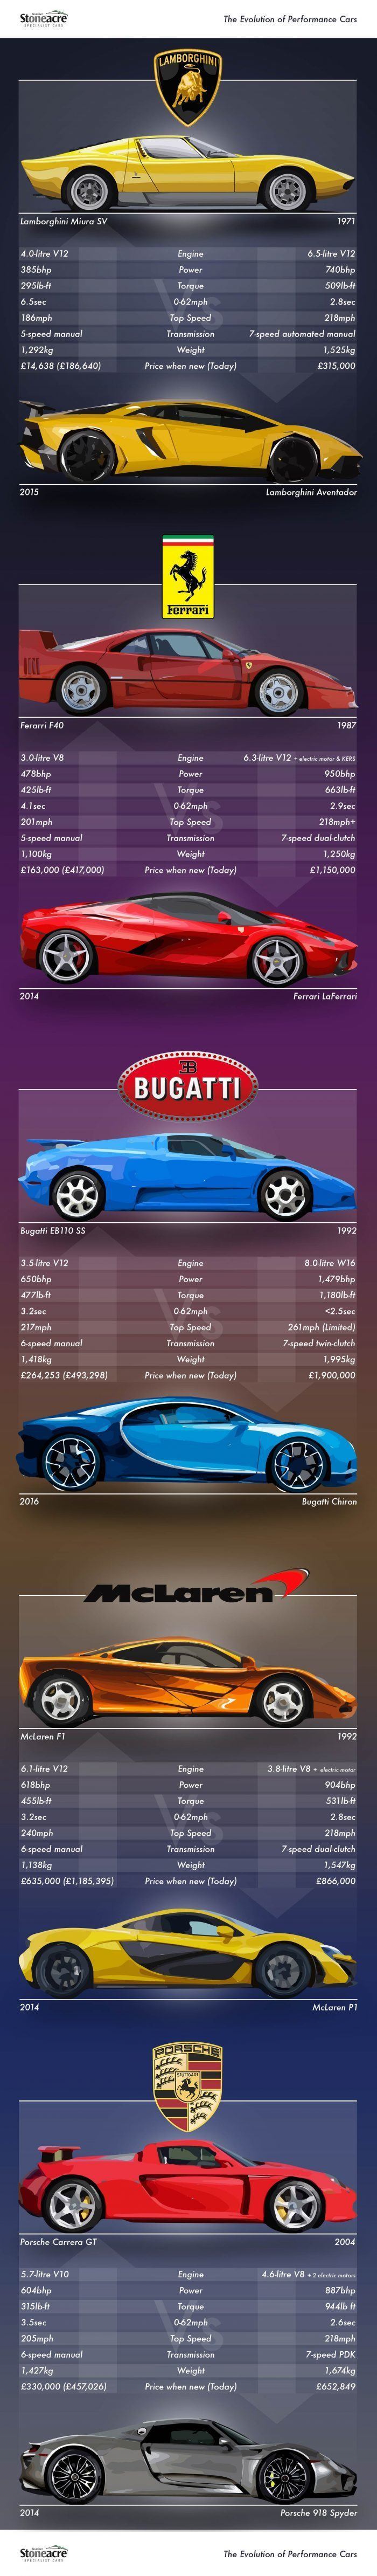 Performance Cars Comparision Chart